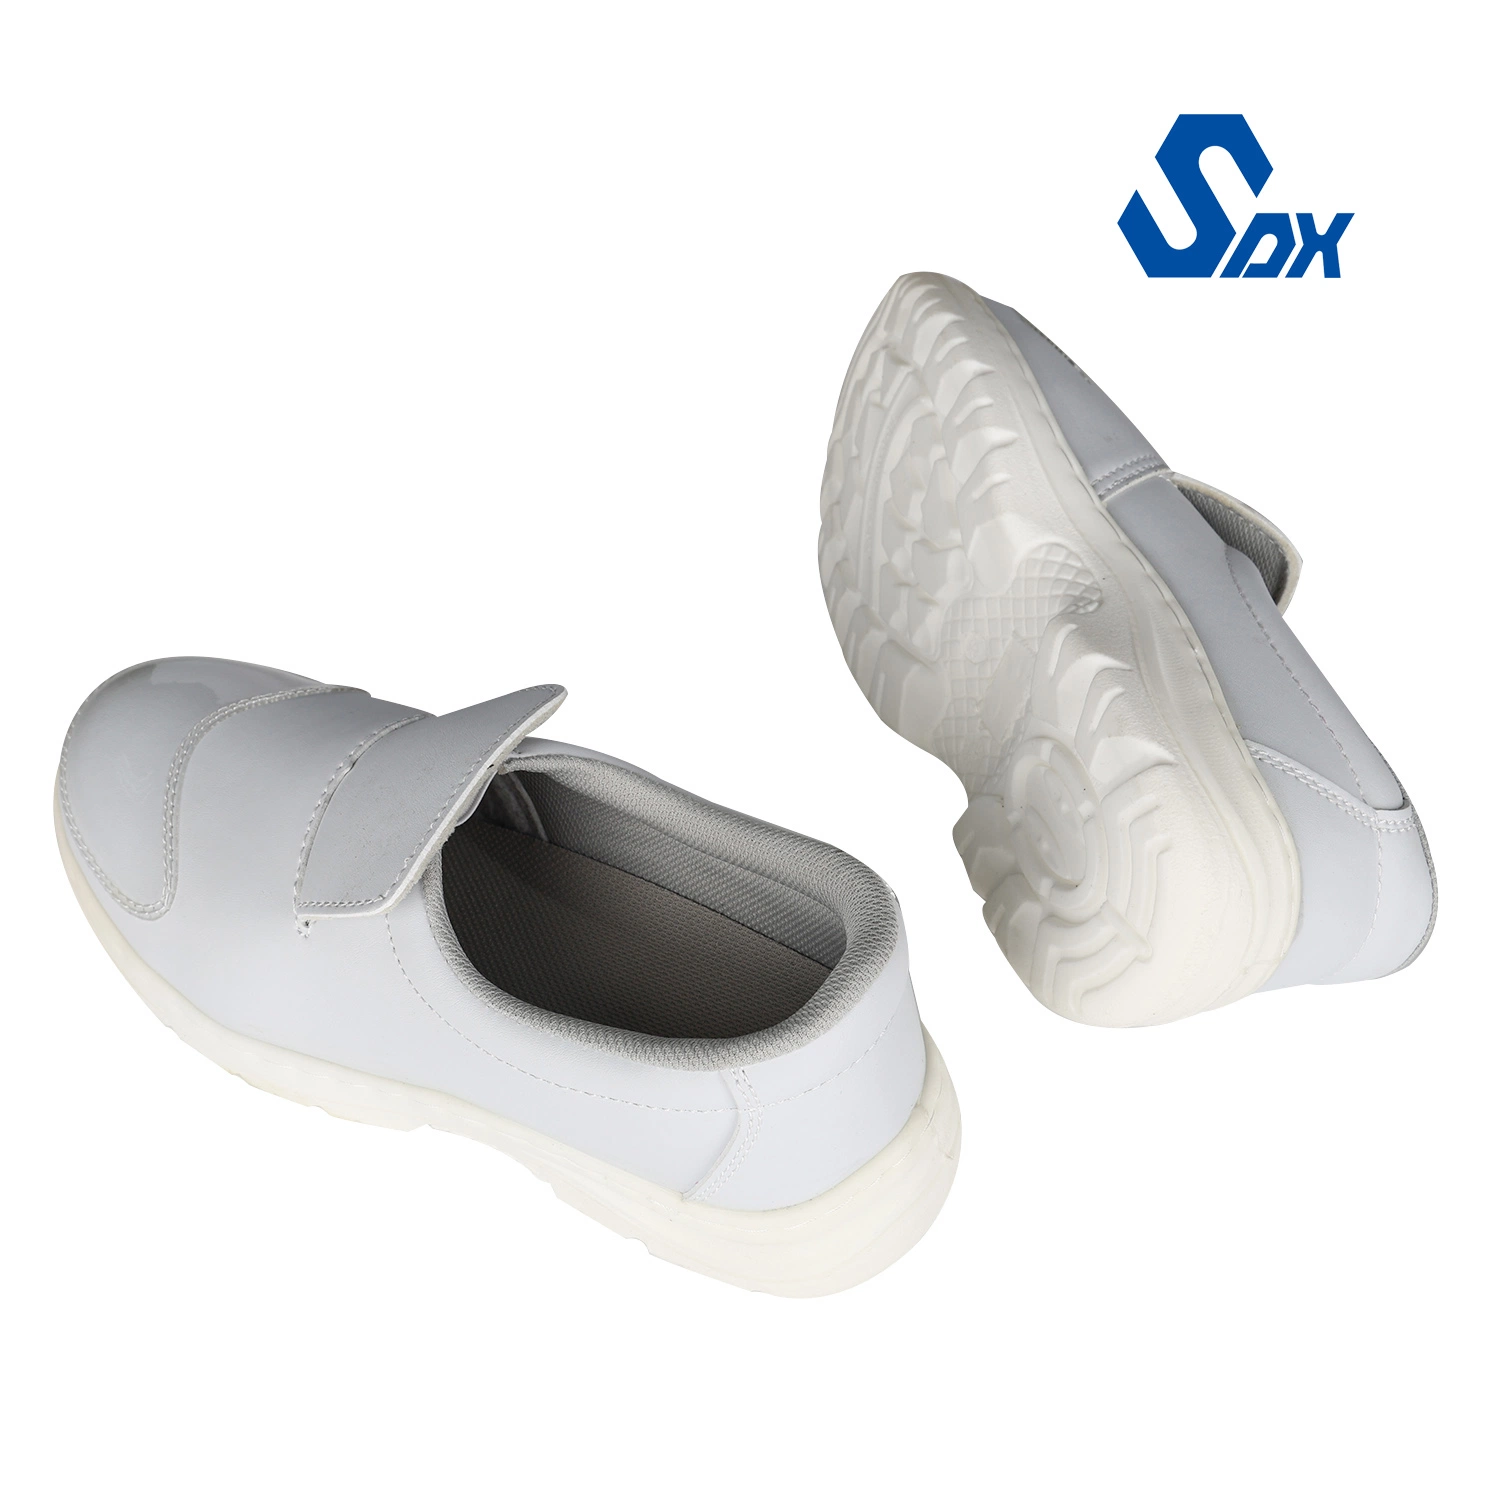 ESD Cleanroom PU Sole Dust Free Shoe ESD Antistatic Work Shoes Safety Shoes